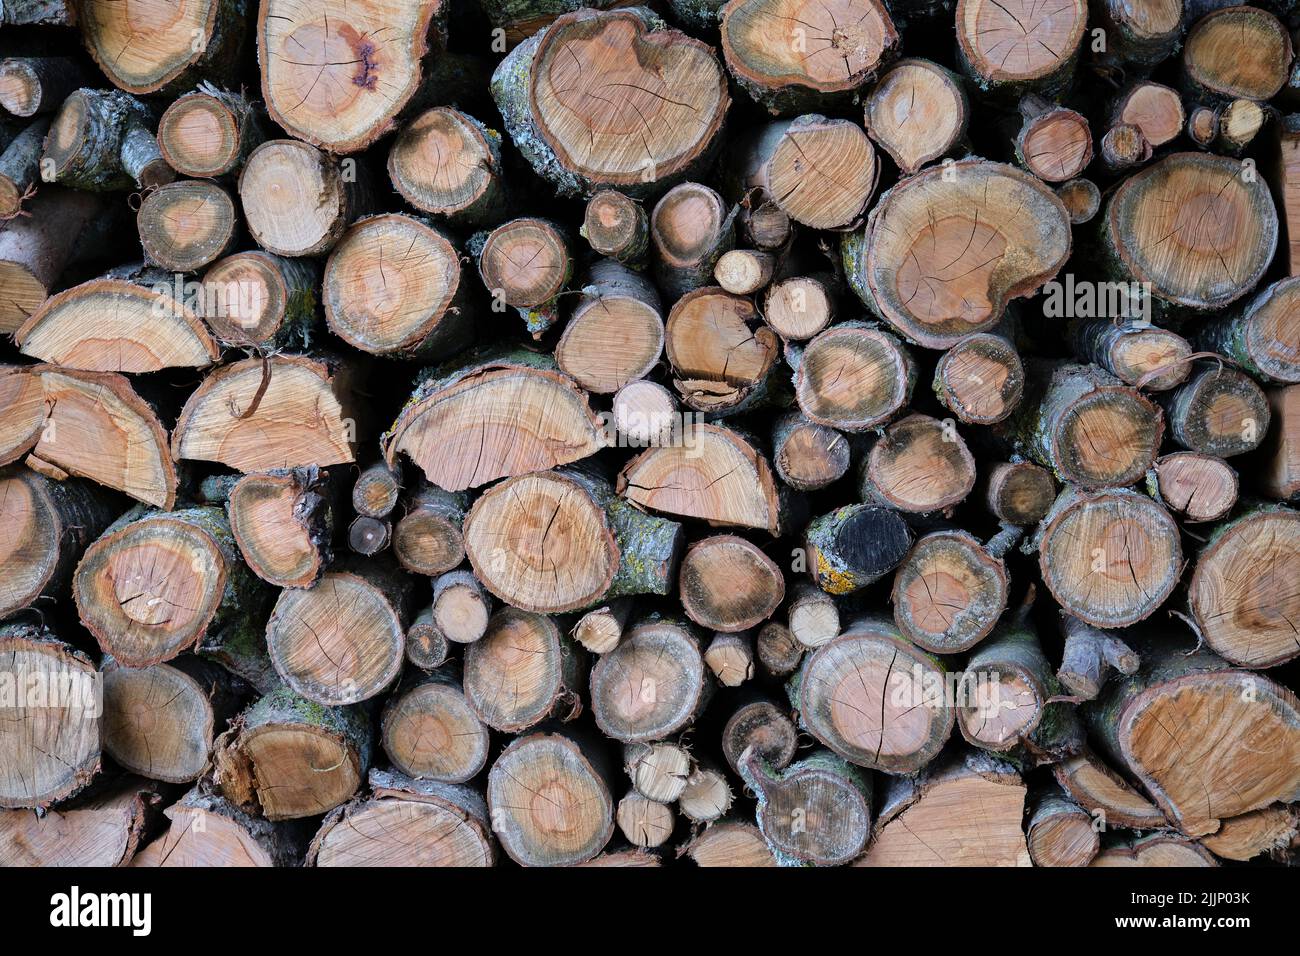 Full frame background of dry firewood stacked together and forming wall in yard Stock Photo